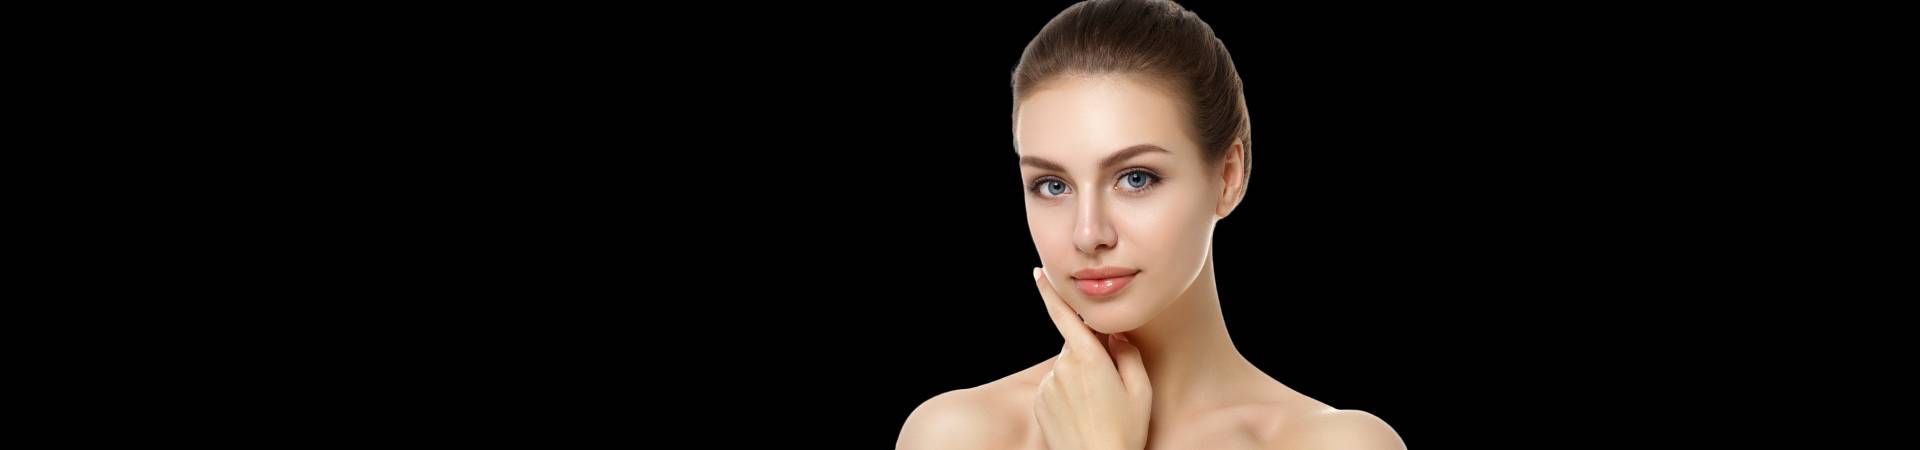 Non-Surgical Chin Enhancement Los Angeles, CA